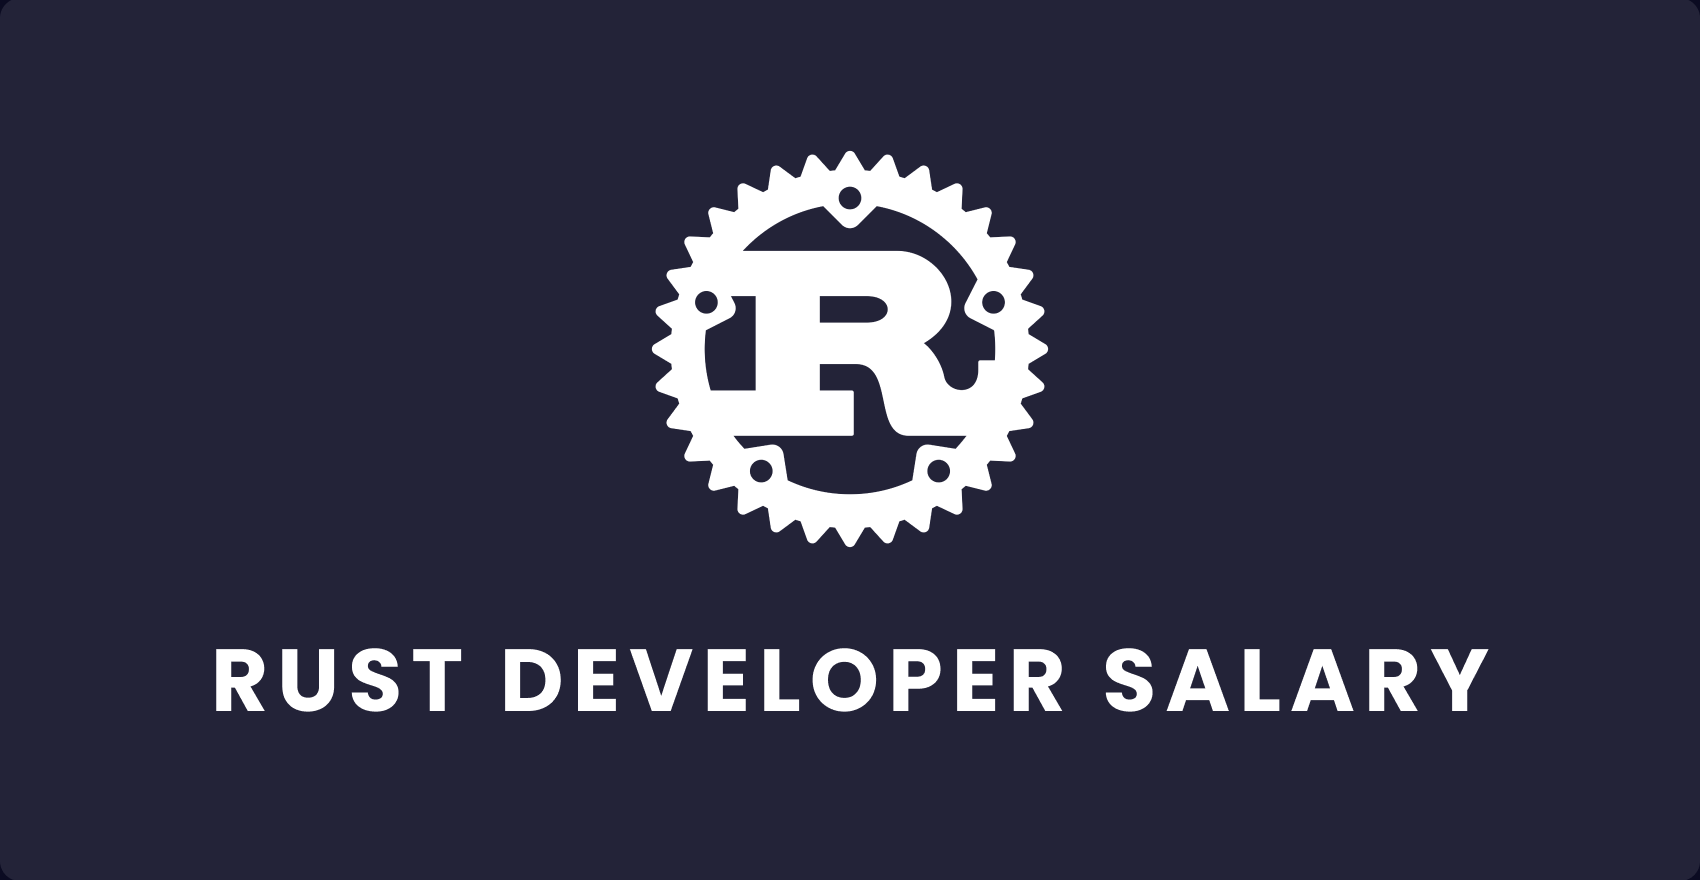 Rust Developer Salary: Calculate and Save the Development Budget